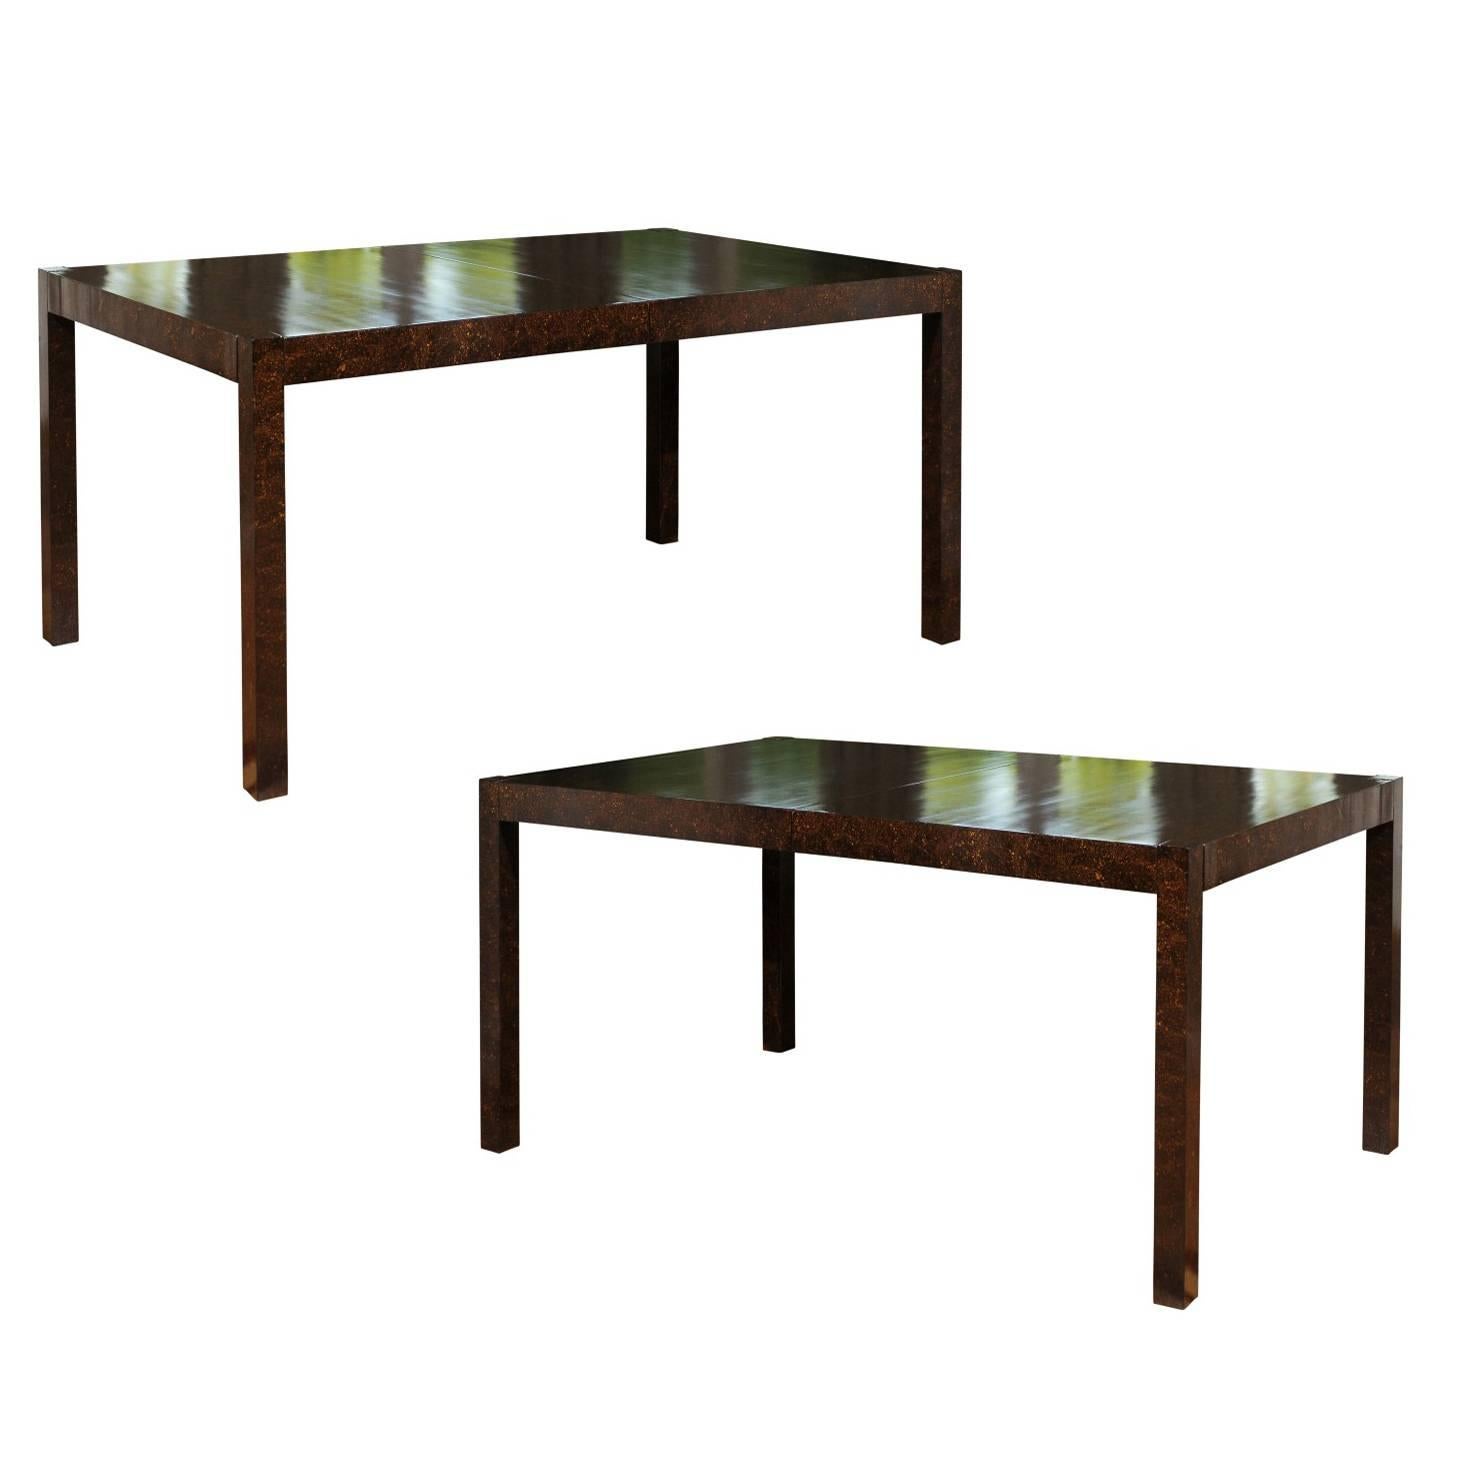 Elegant Restored Vintage Oil Drop Lacquer Extension Dining Table or Writing Desk For Sale